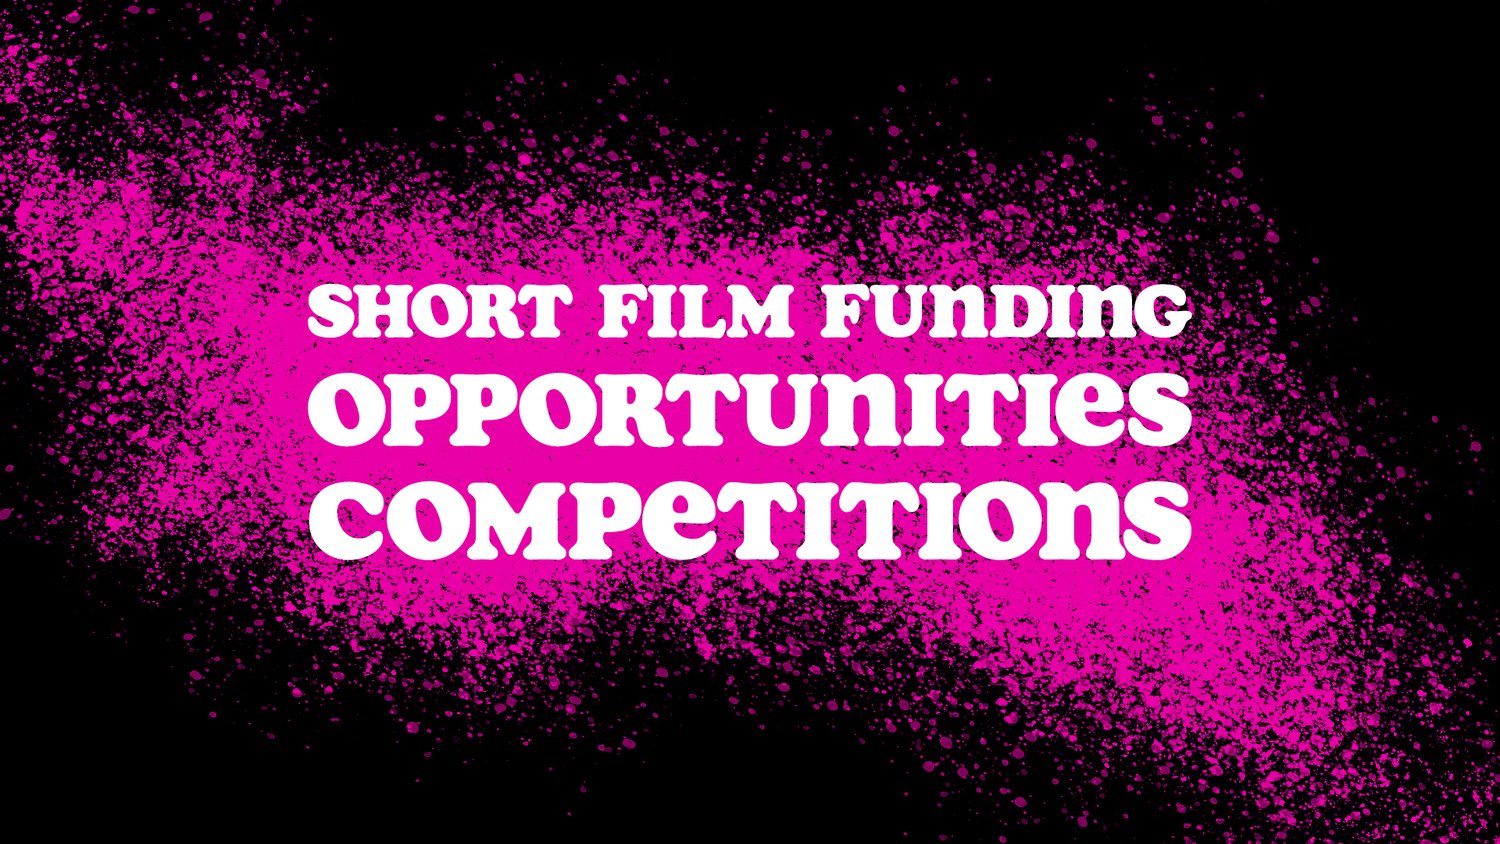 Other Brother Studios Short Film Opportunities and Competitions for emerging filmmakers. — BROTHER STUDIOS